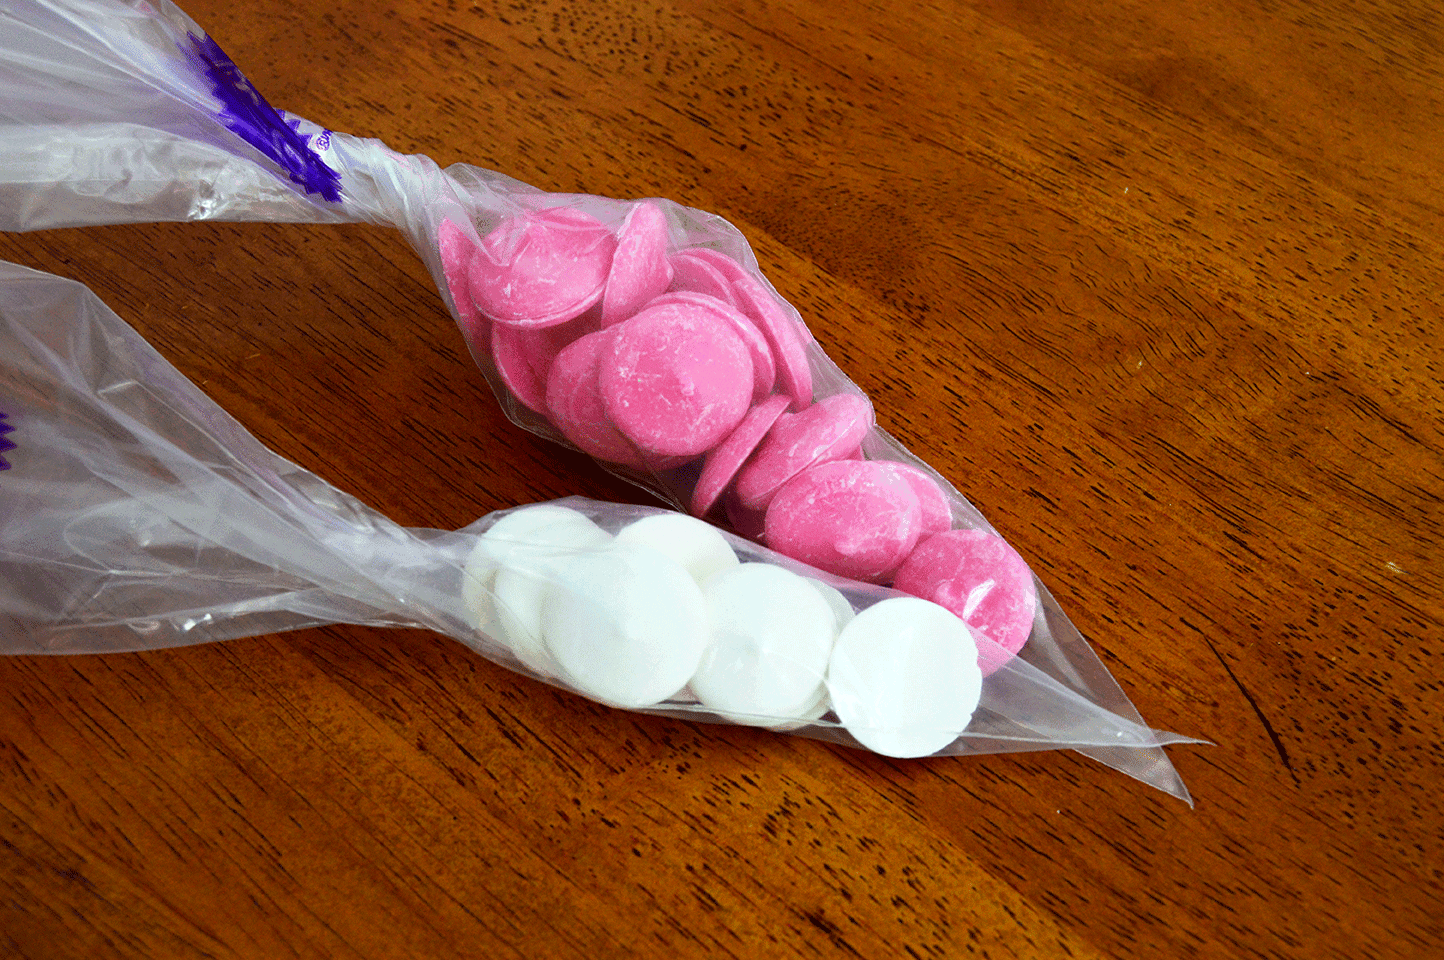 candy melts in piping bag, unmelted